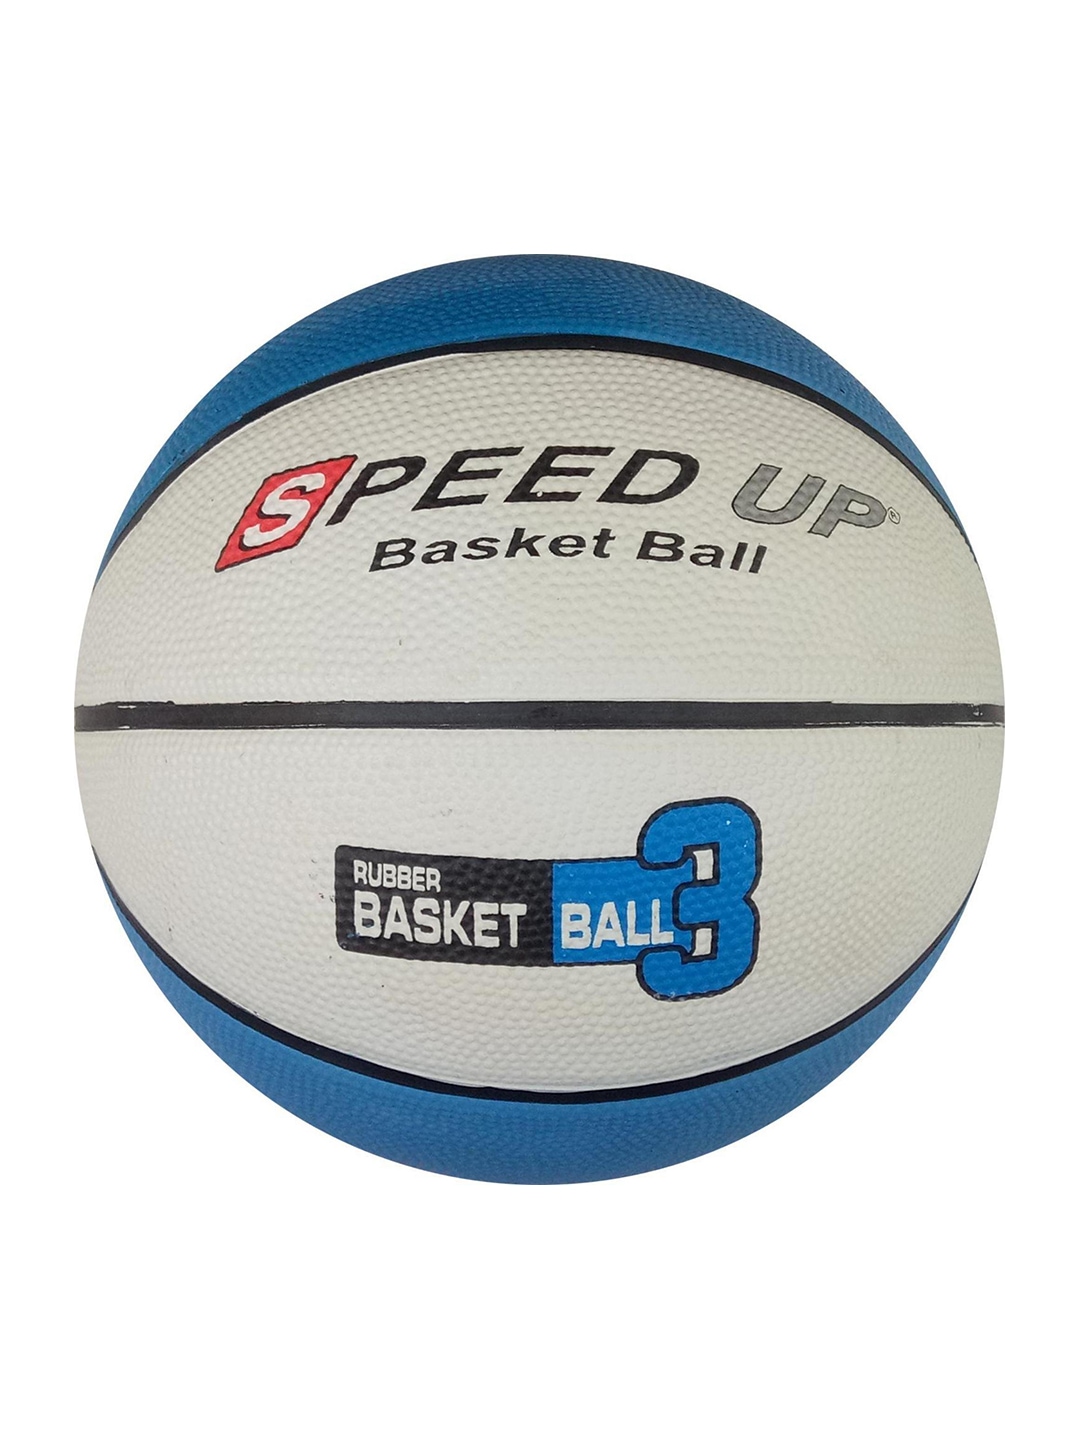 

Speed Up Strong & Durable Rubber Basket Ball - Size 3, White